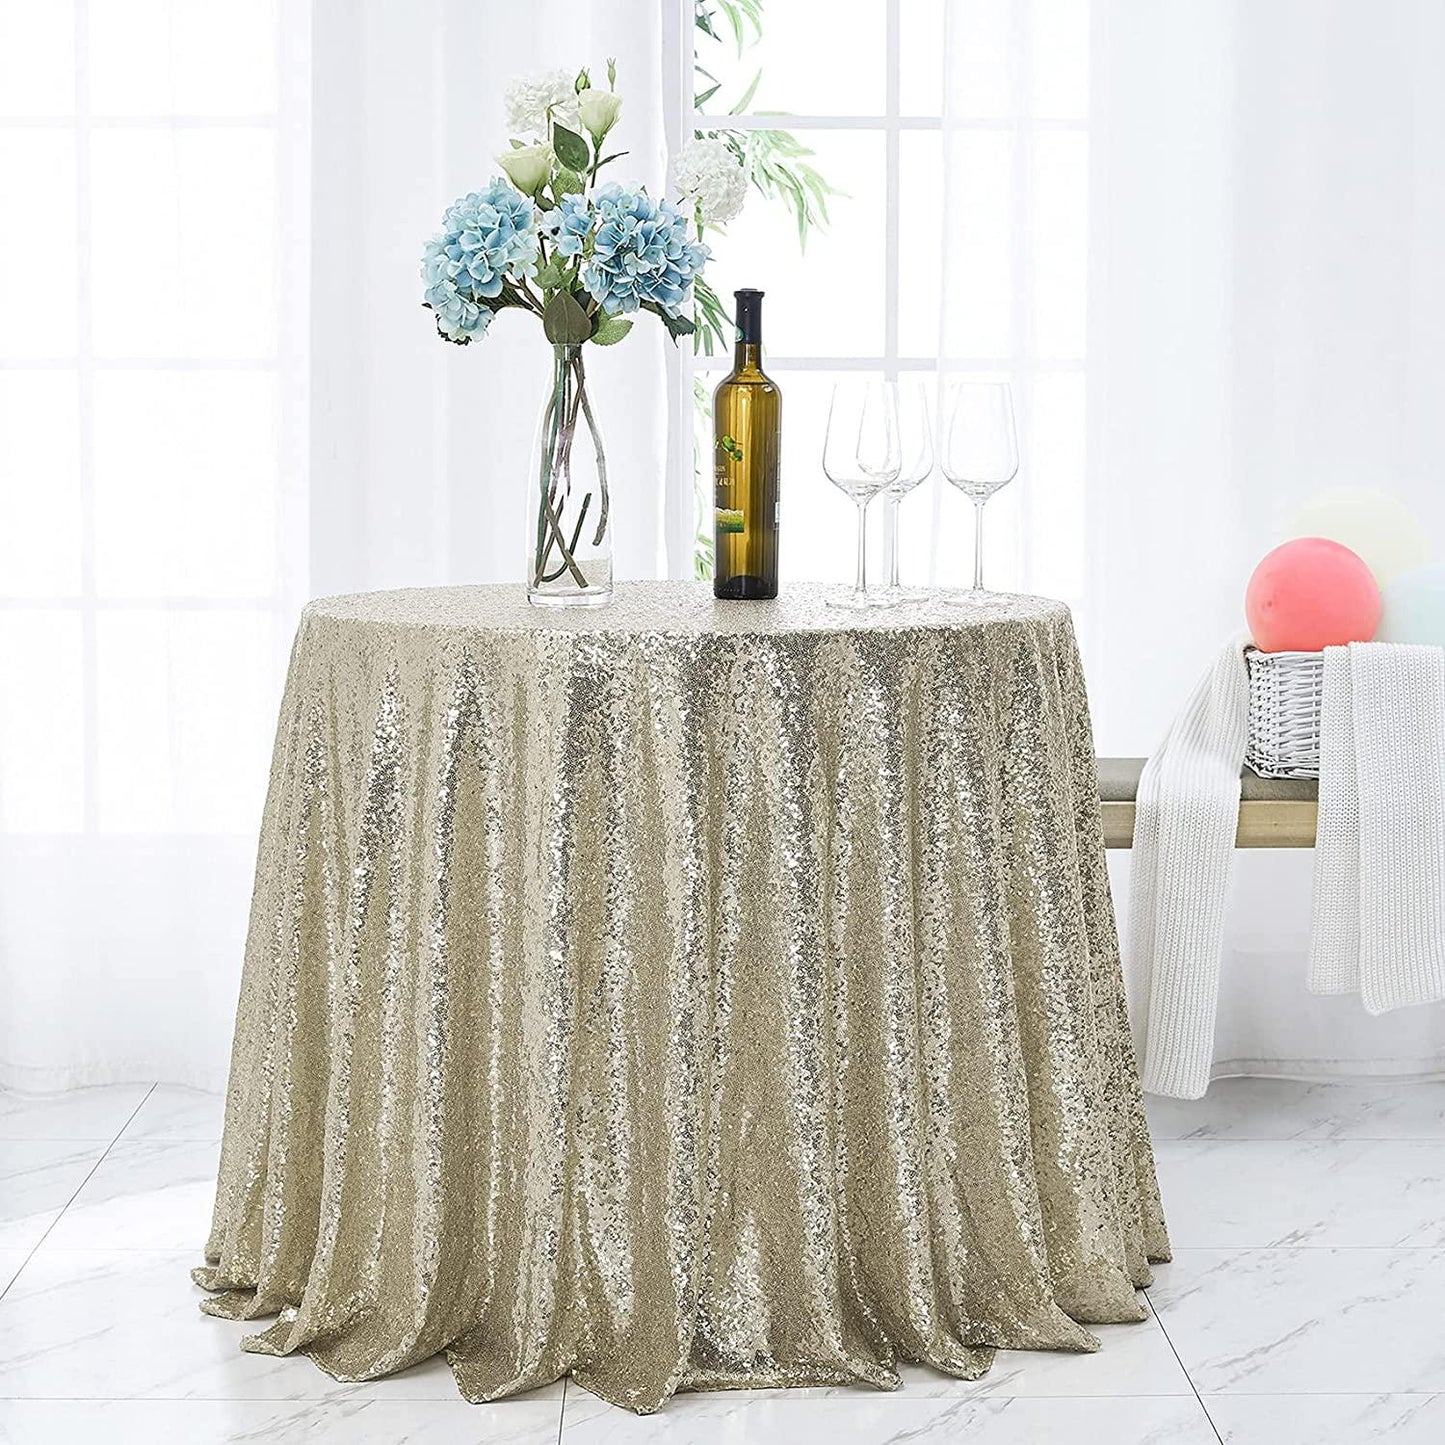 120 inch Round Sequin Tablecloth Wedding Arch, Glitter Tablecloth Arbor for Bridal Shower Decorations, Birthday, Wedding - If you say i do